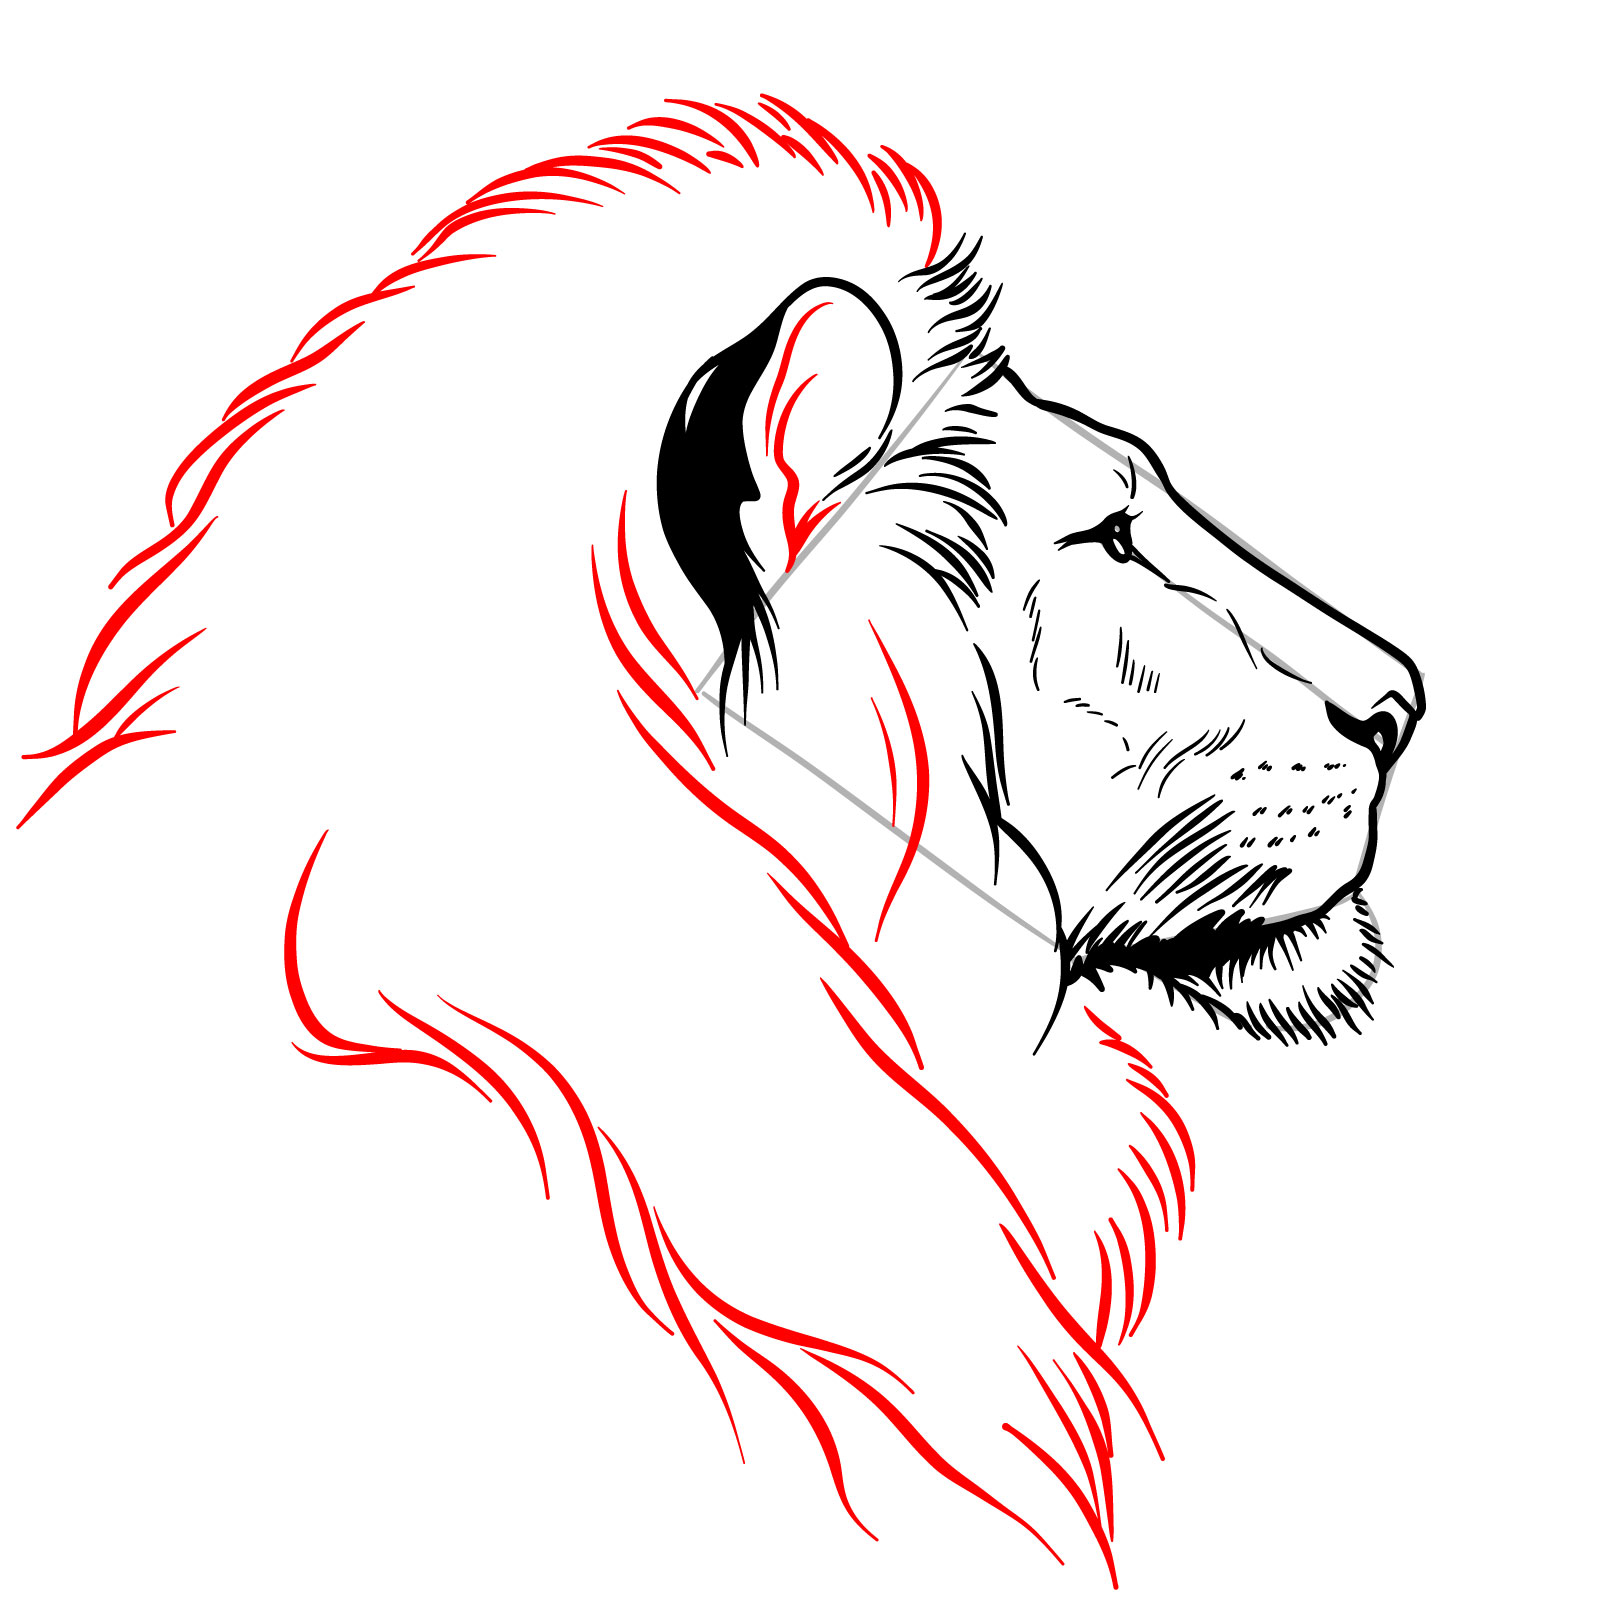 Sketching the full mane shape with fur details for a lion's head - step 08